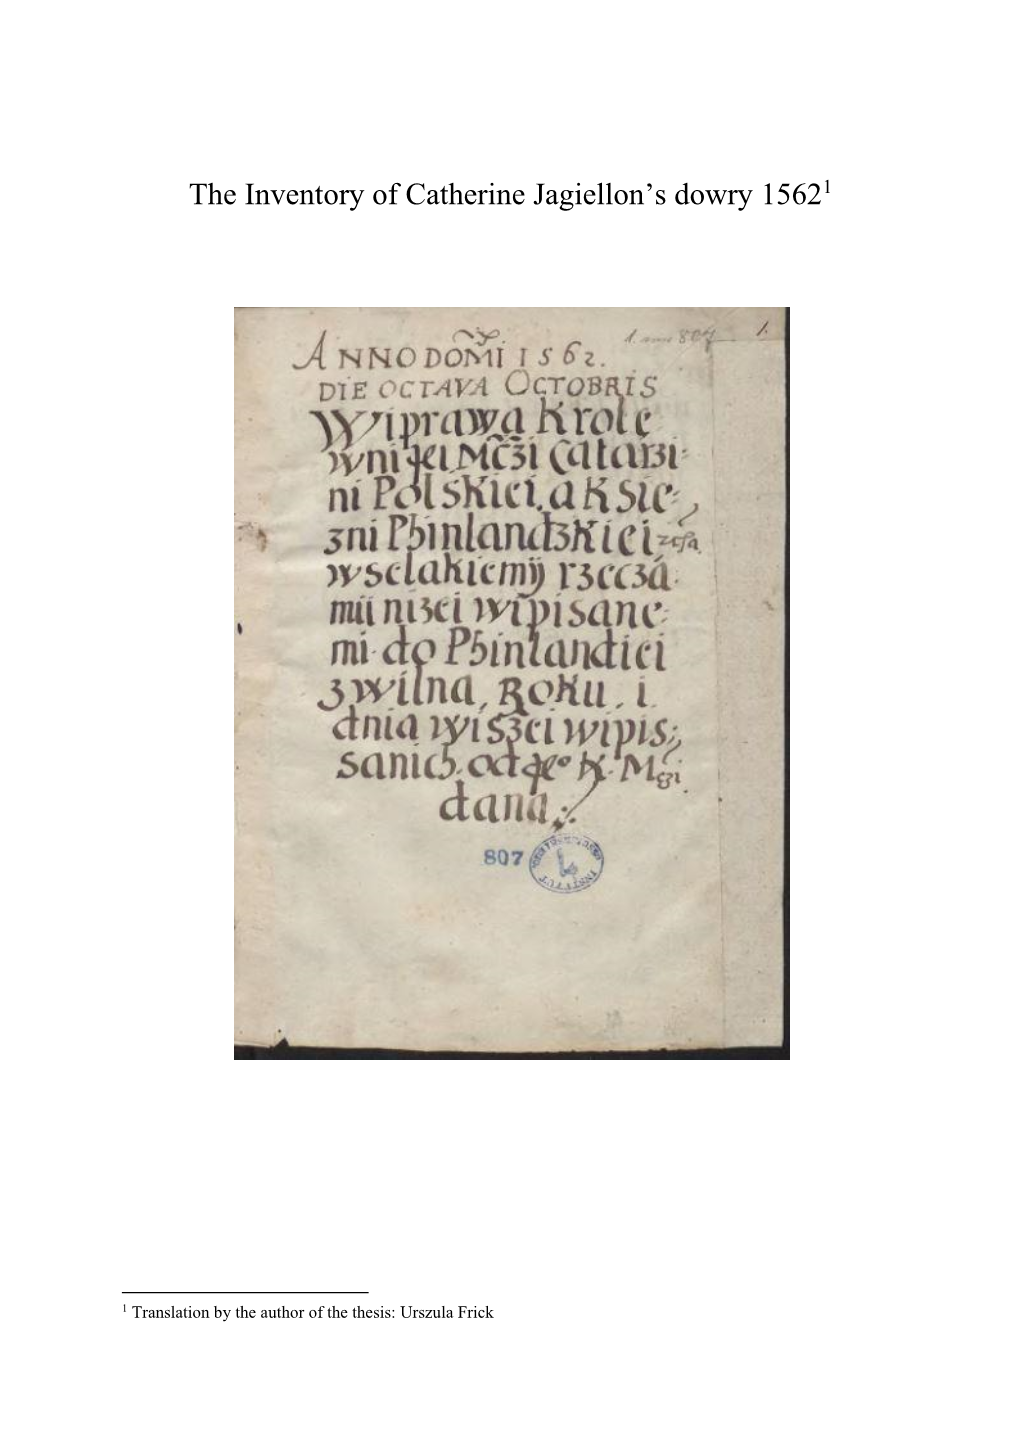 The Inventory of Catherine Jagiellon's Dowry 15621